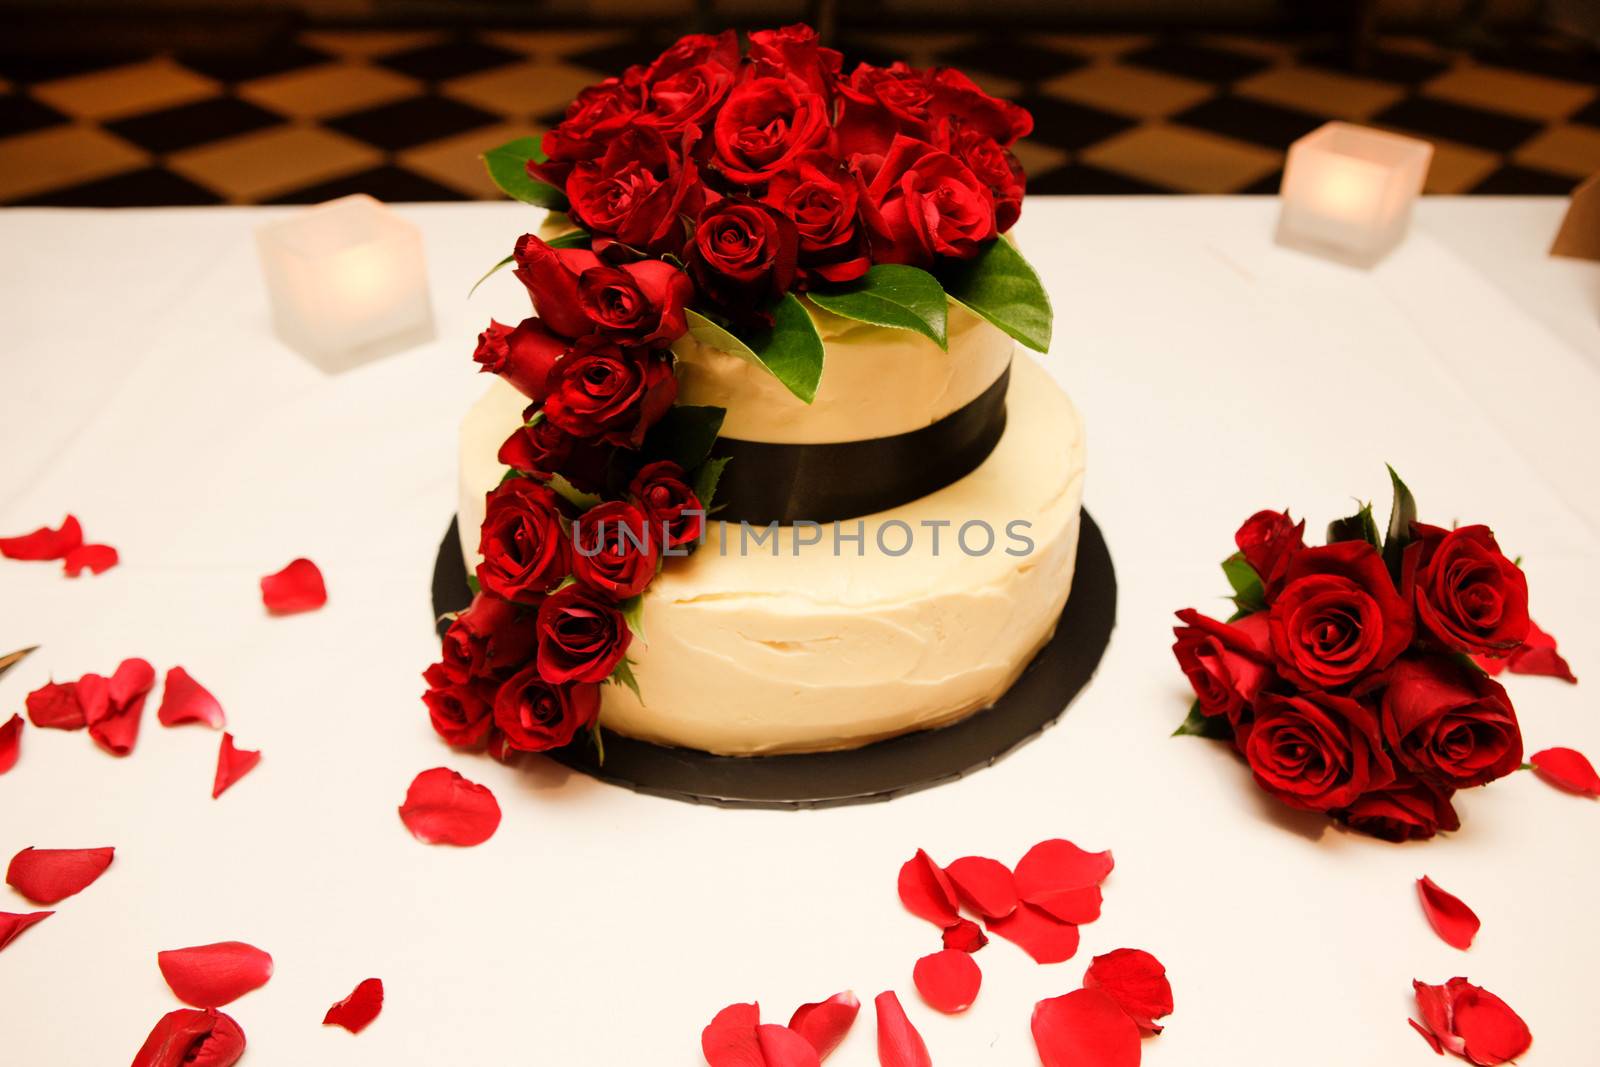 Wedding cake and roses by jrstock